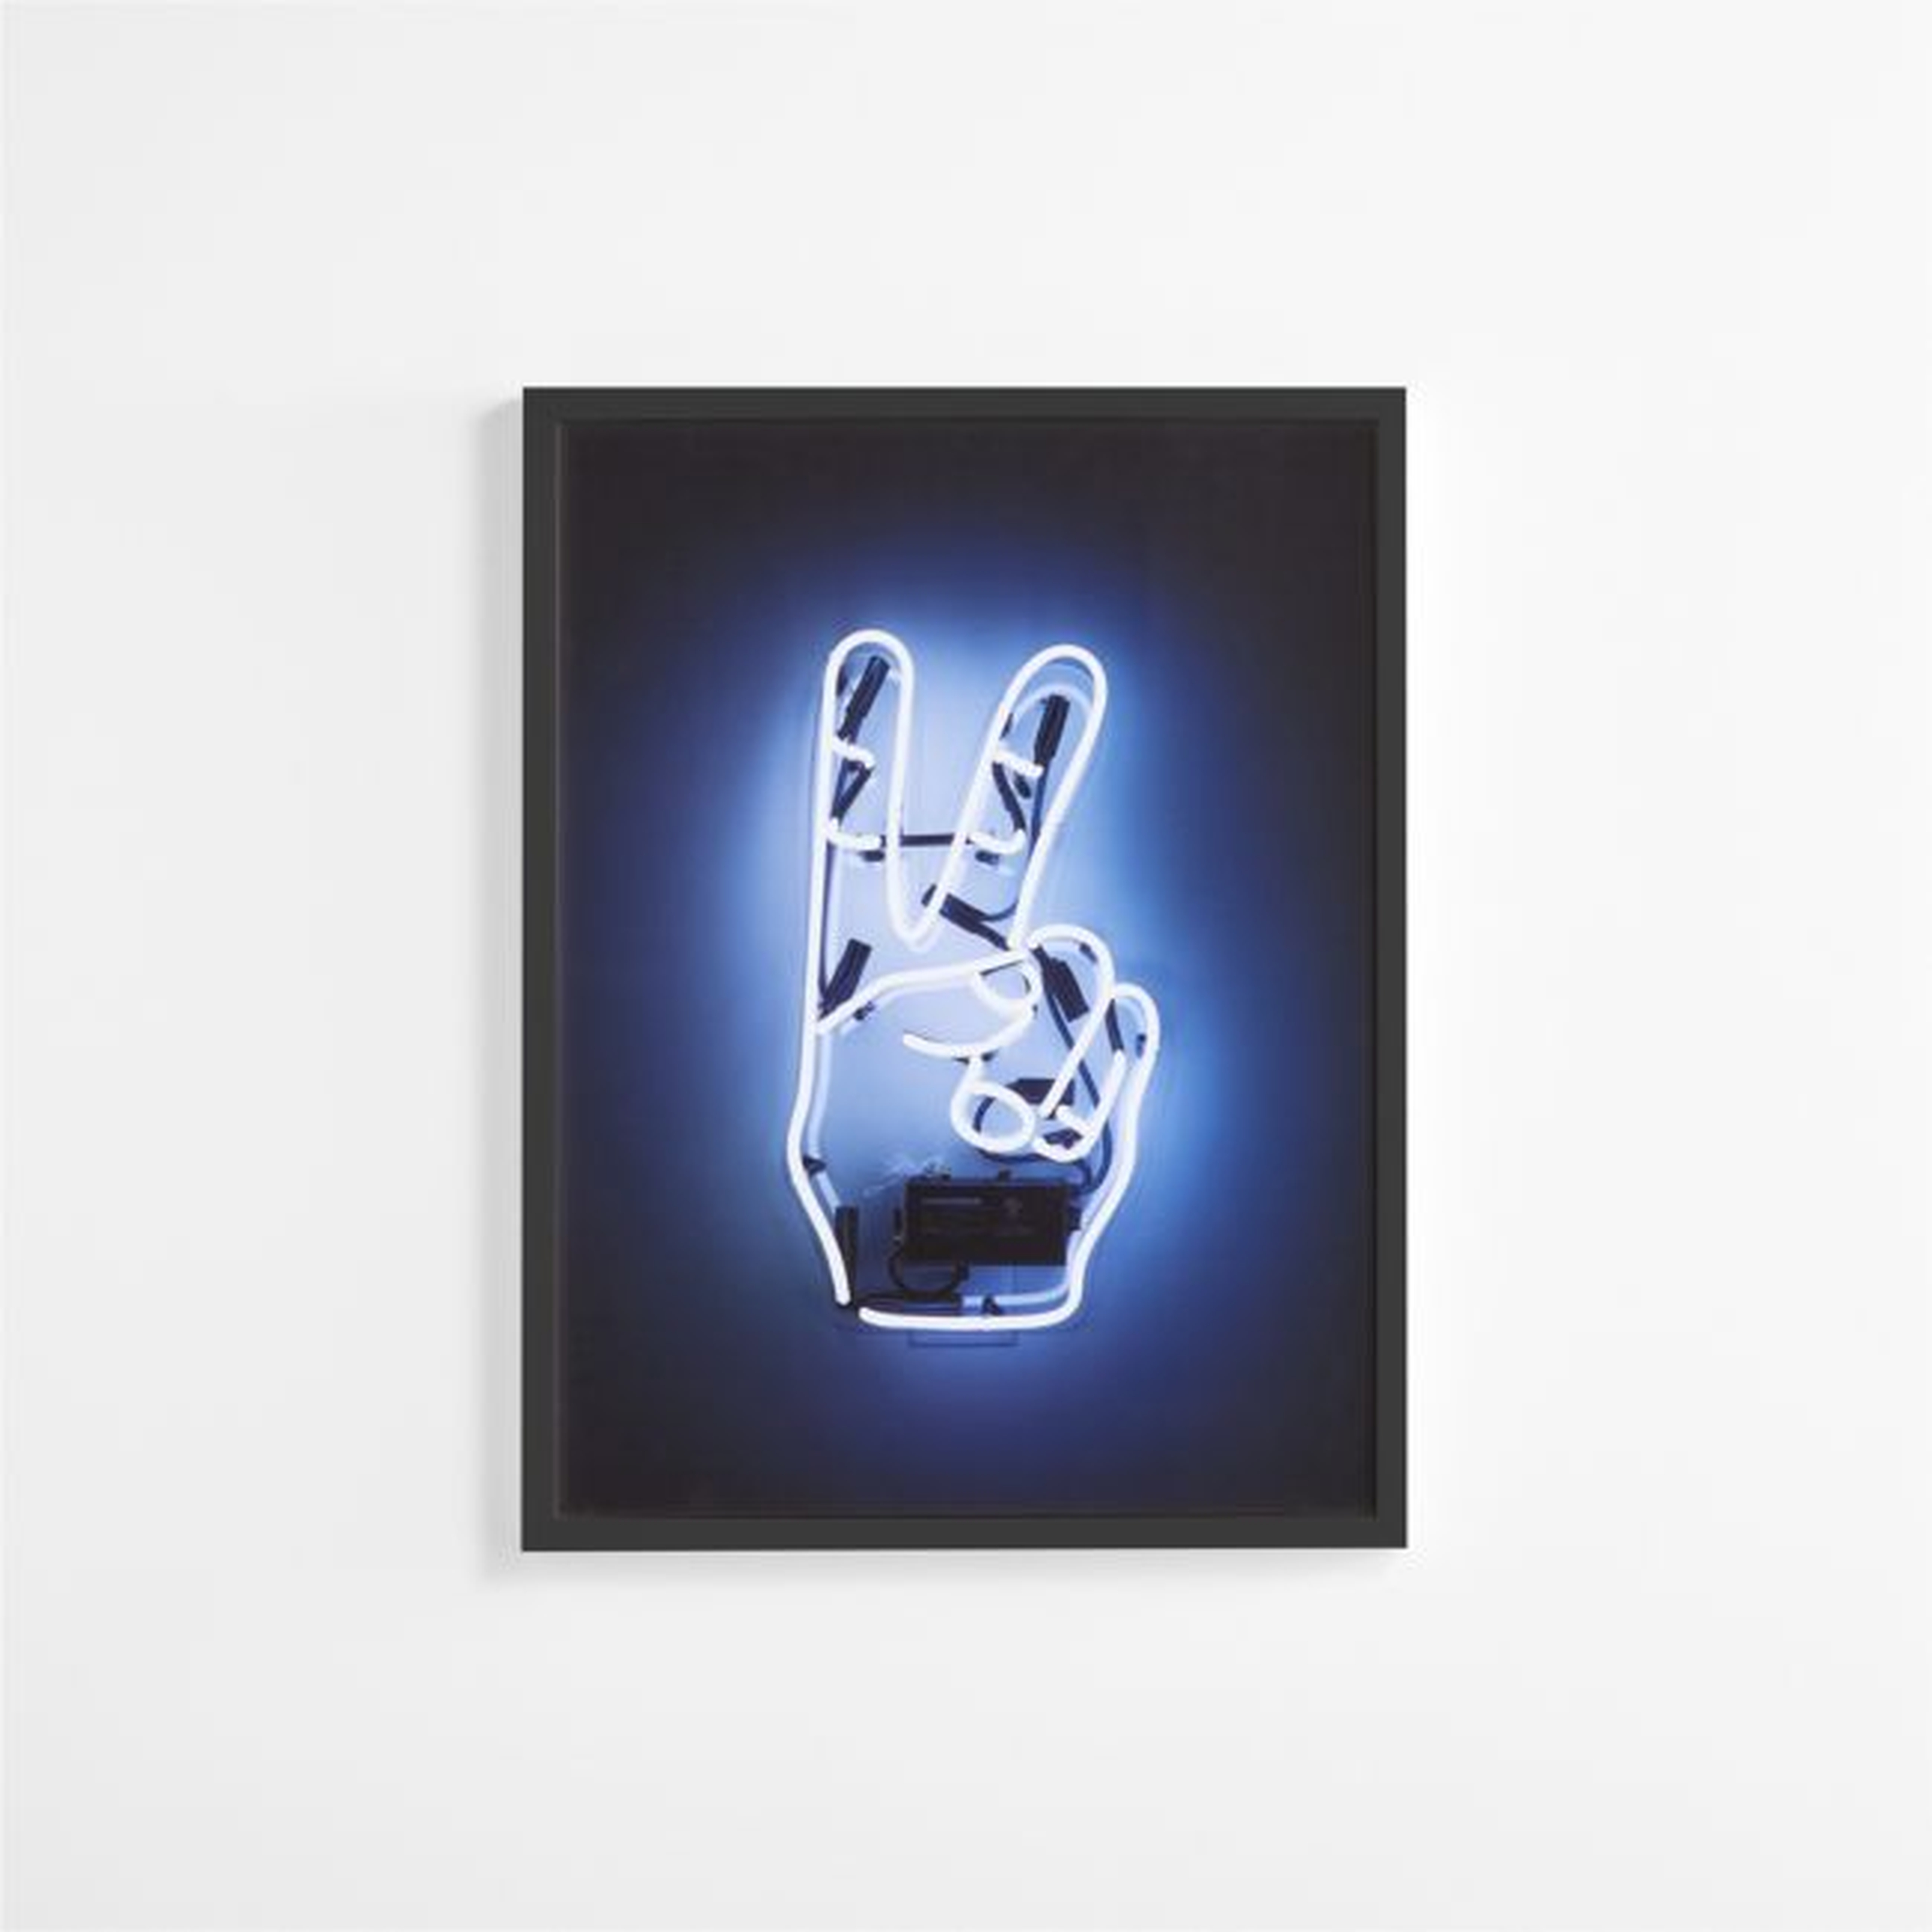 Neon Peace Framed Wall Art Print - Crate and Barrel